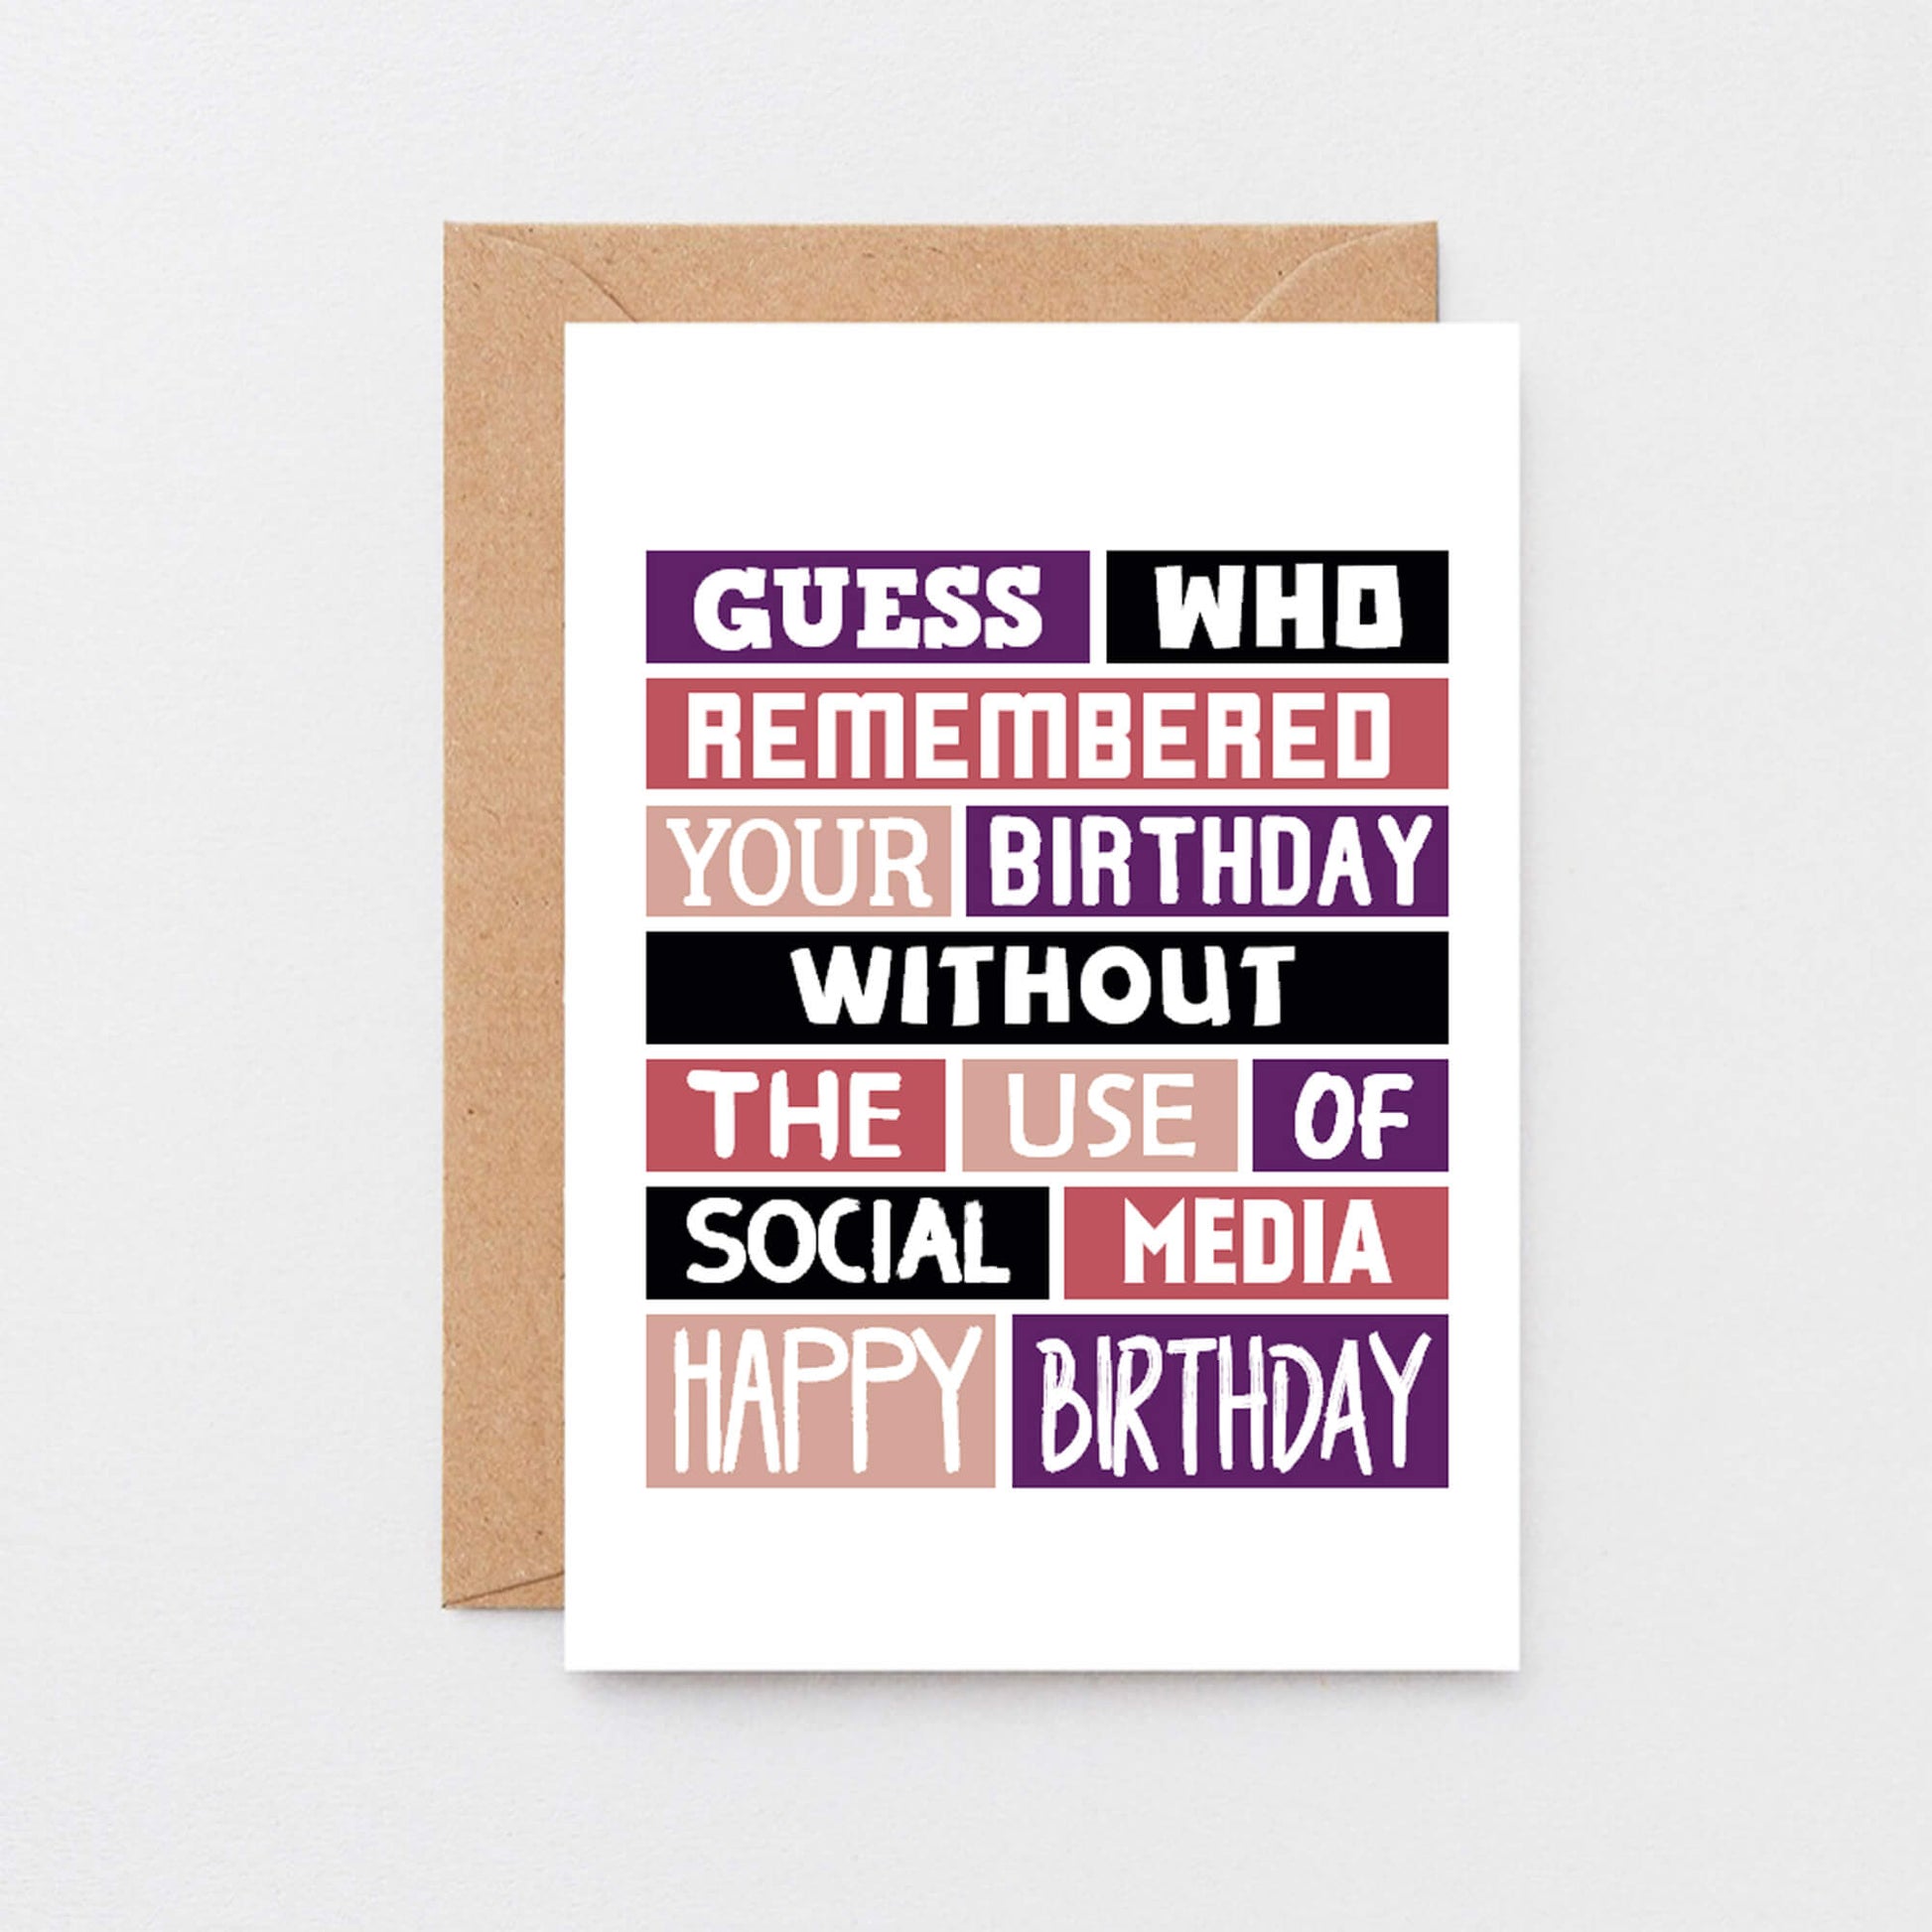 Birthday Card by SixElevenCreations. Reads Guess who remembered your birthday without the use of social media. Happy birthday. Product Code SE0097A6